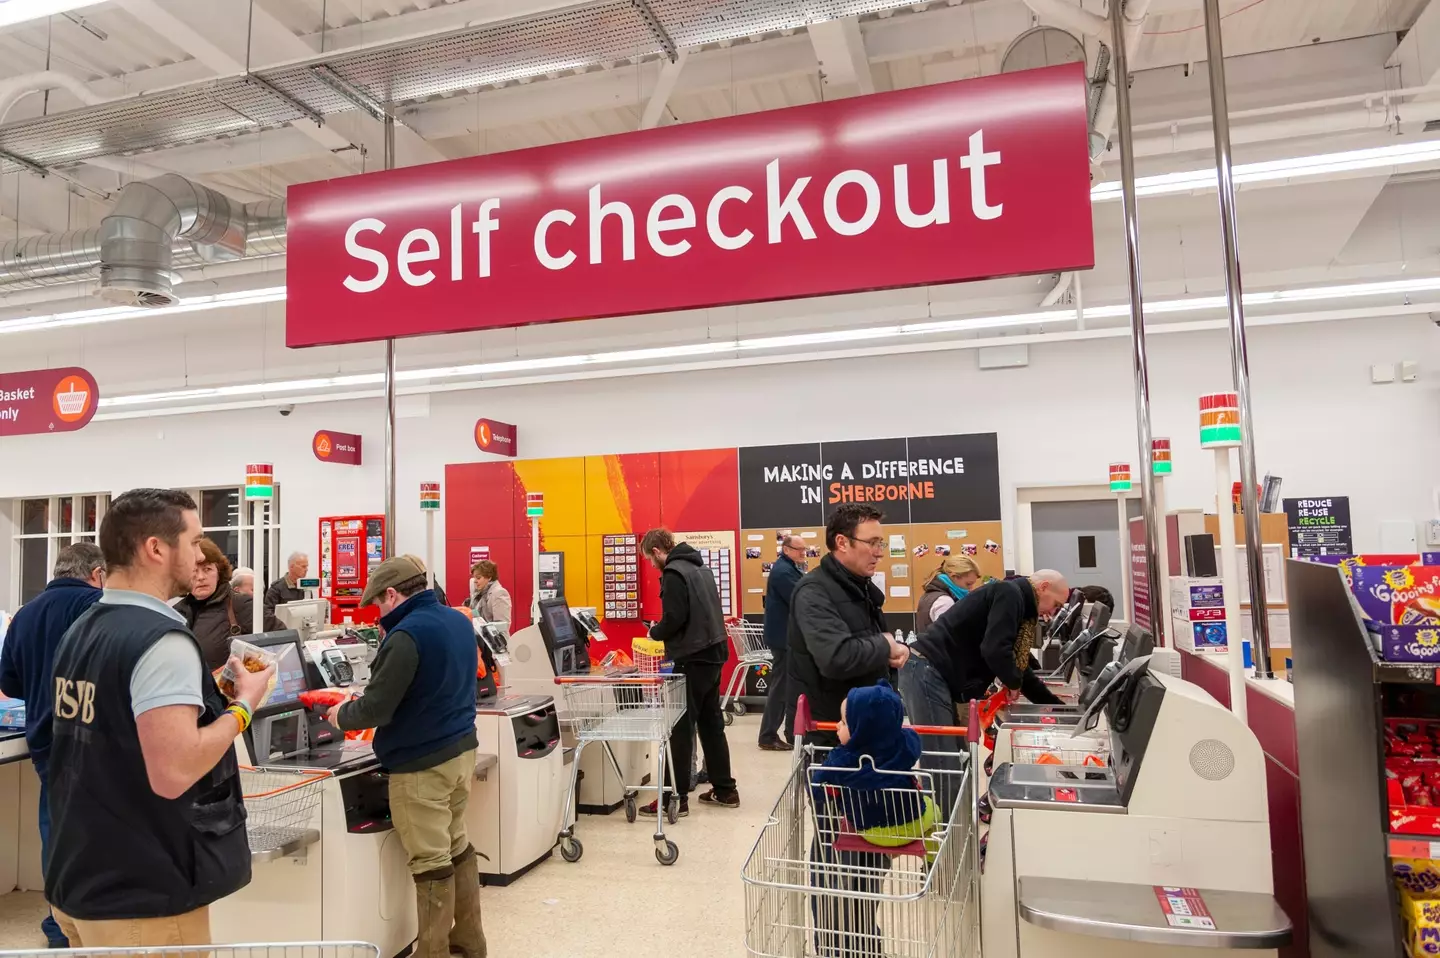 Shoppers at Sainsbury's have reported having their bags checked.